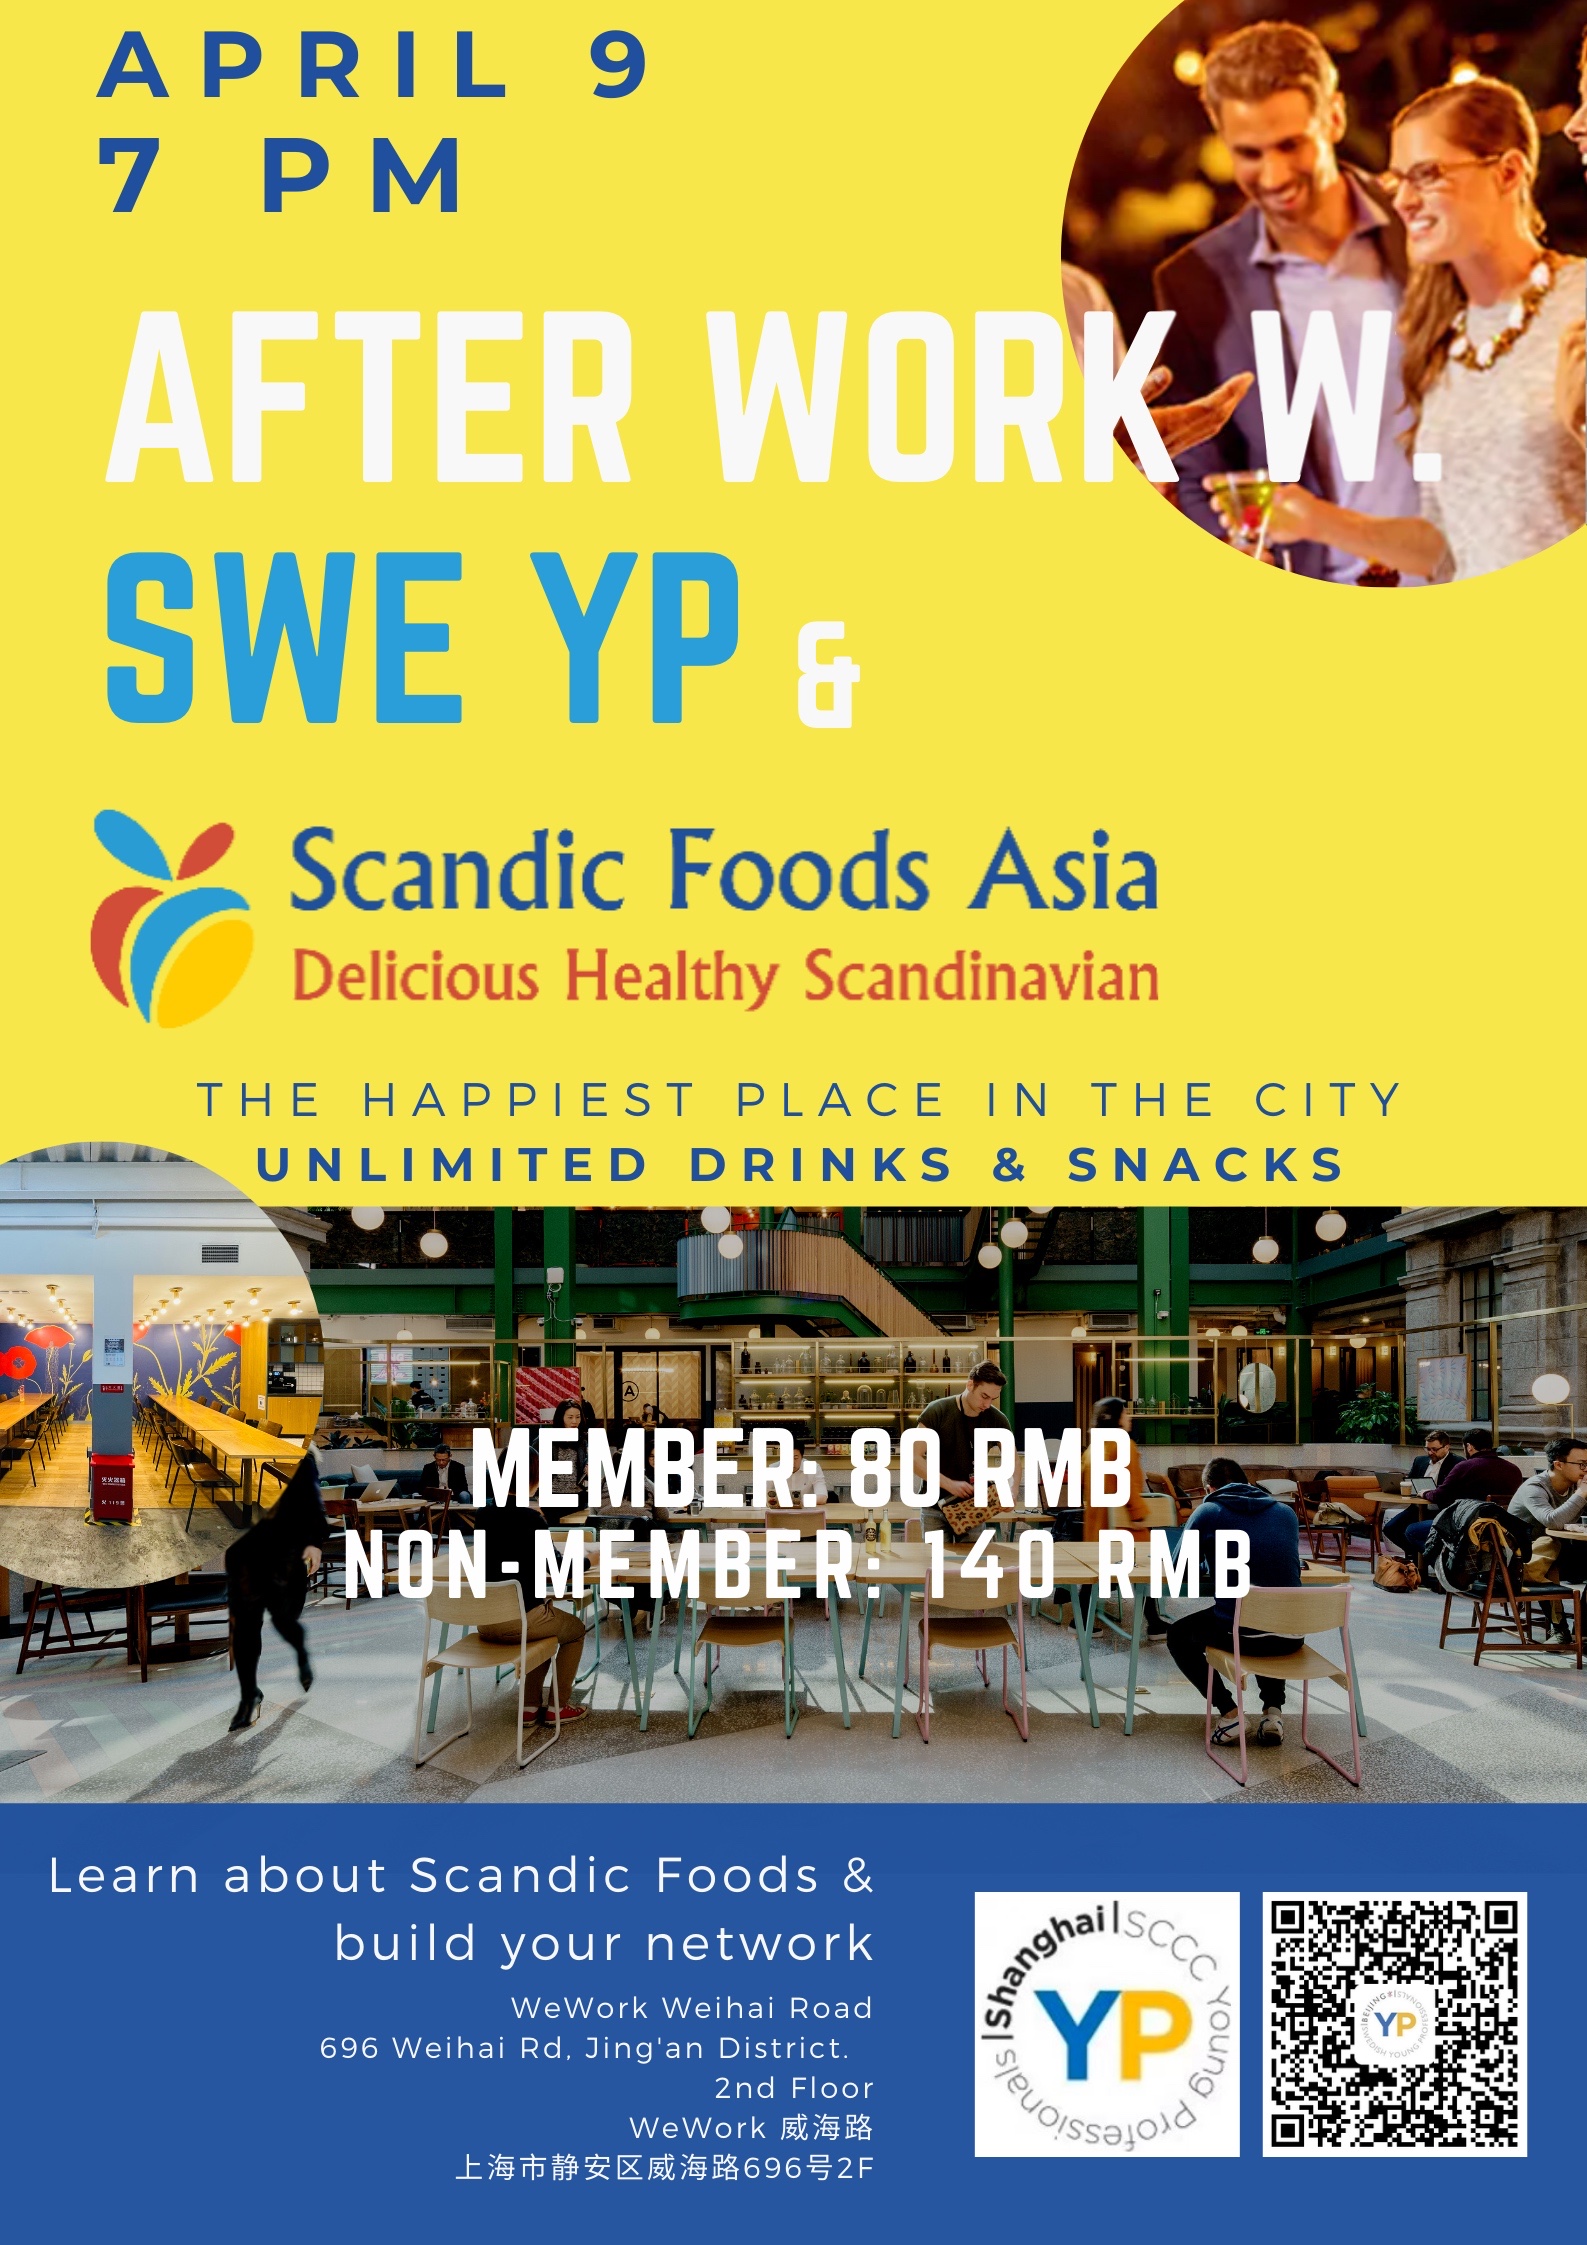 SH YP: After Work at WeWork with Scandic Foods Asia |Shanghai Events